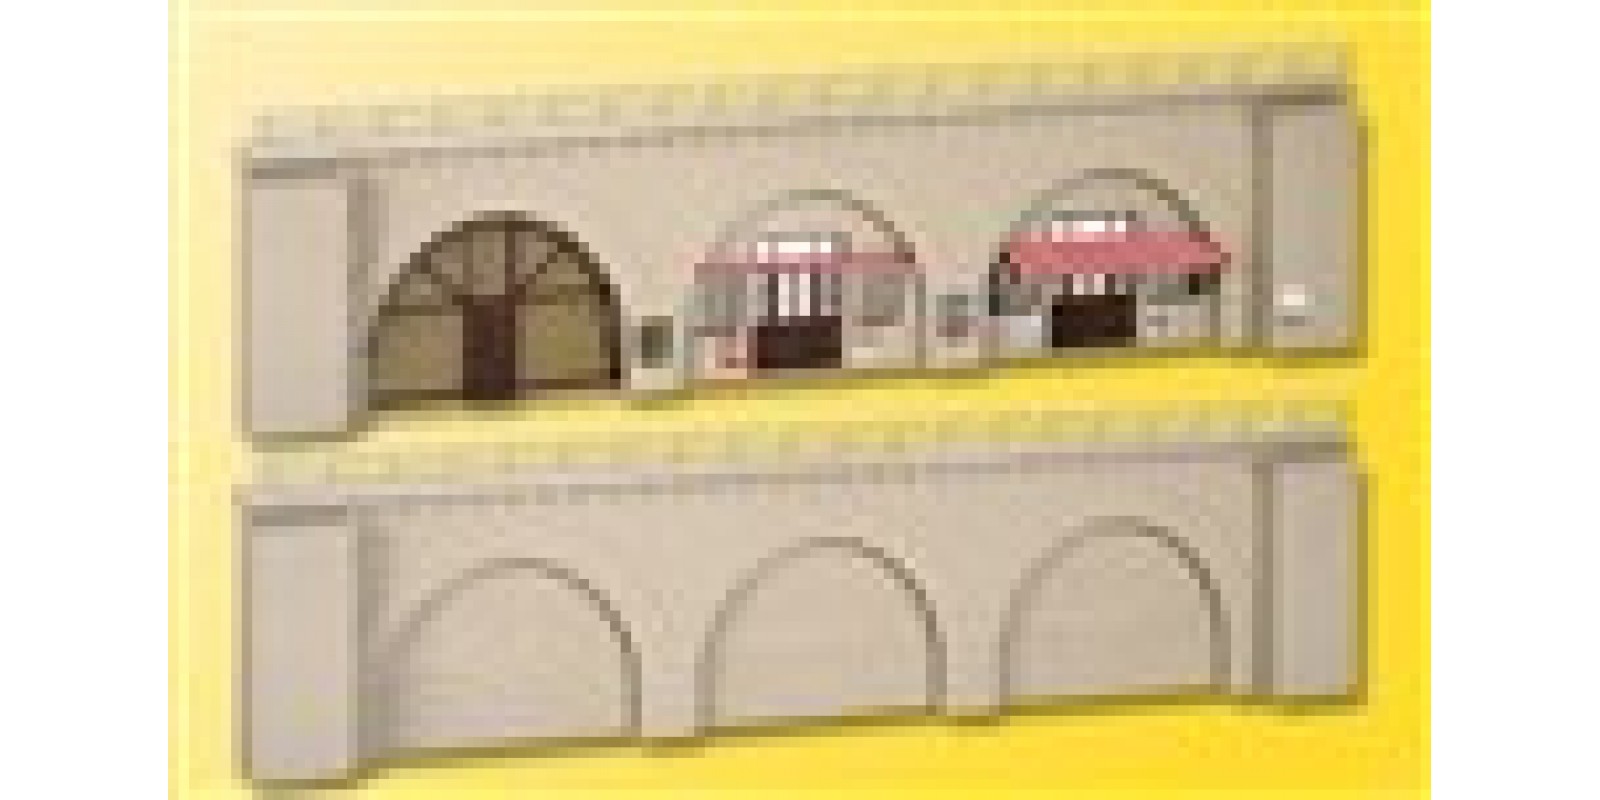 KI39755 H0 Arched retaining walls with shop fronts, 2 pieces